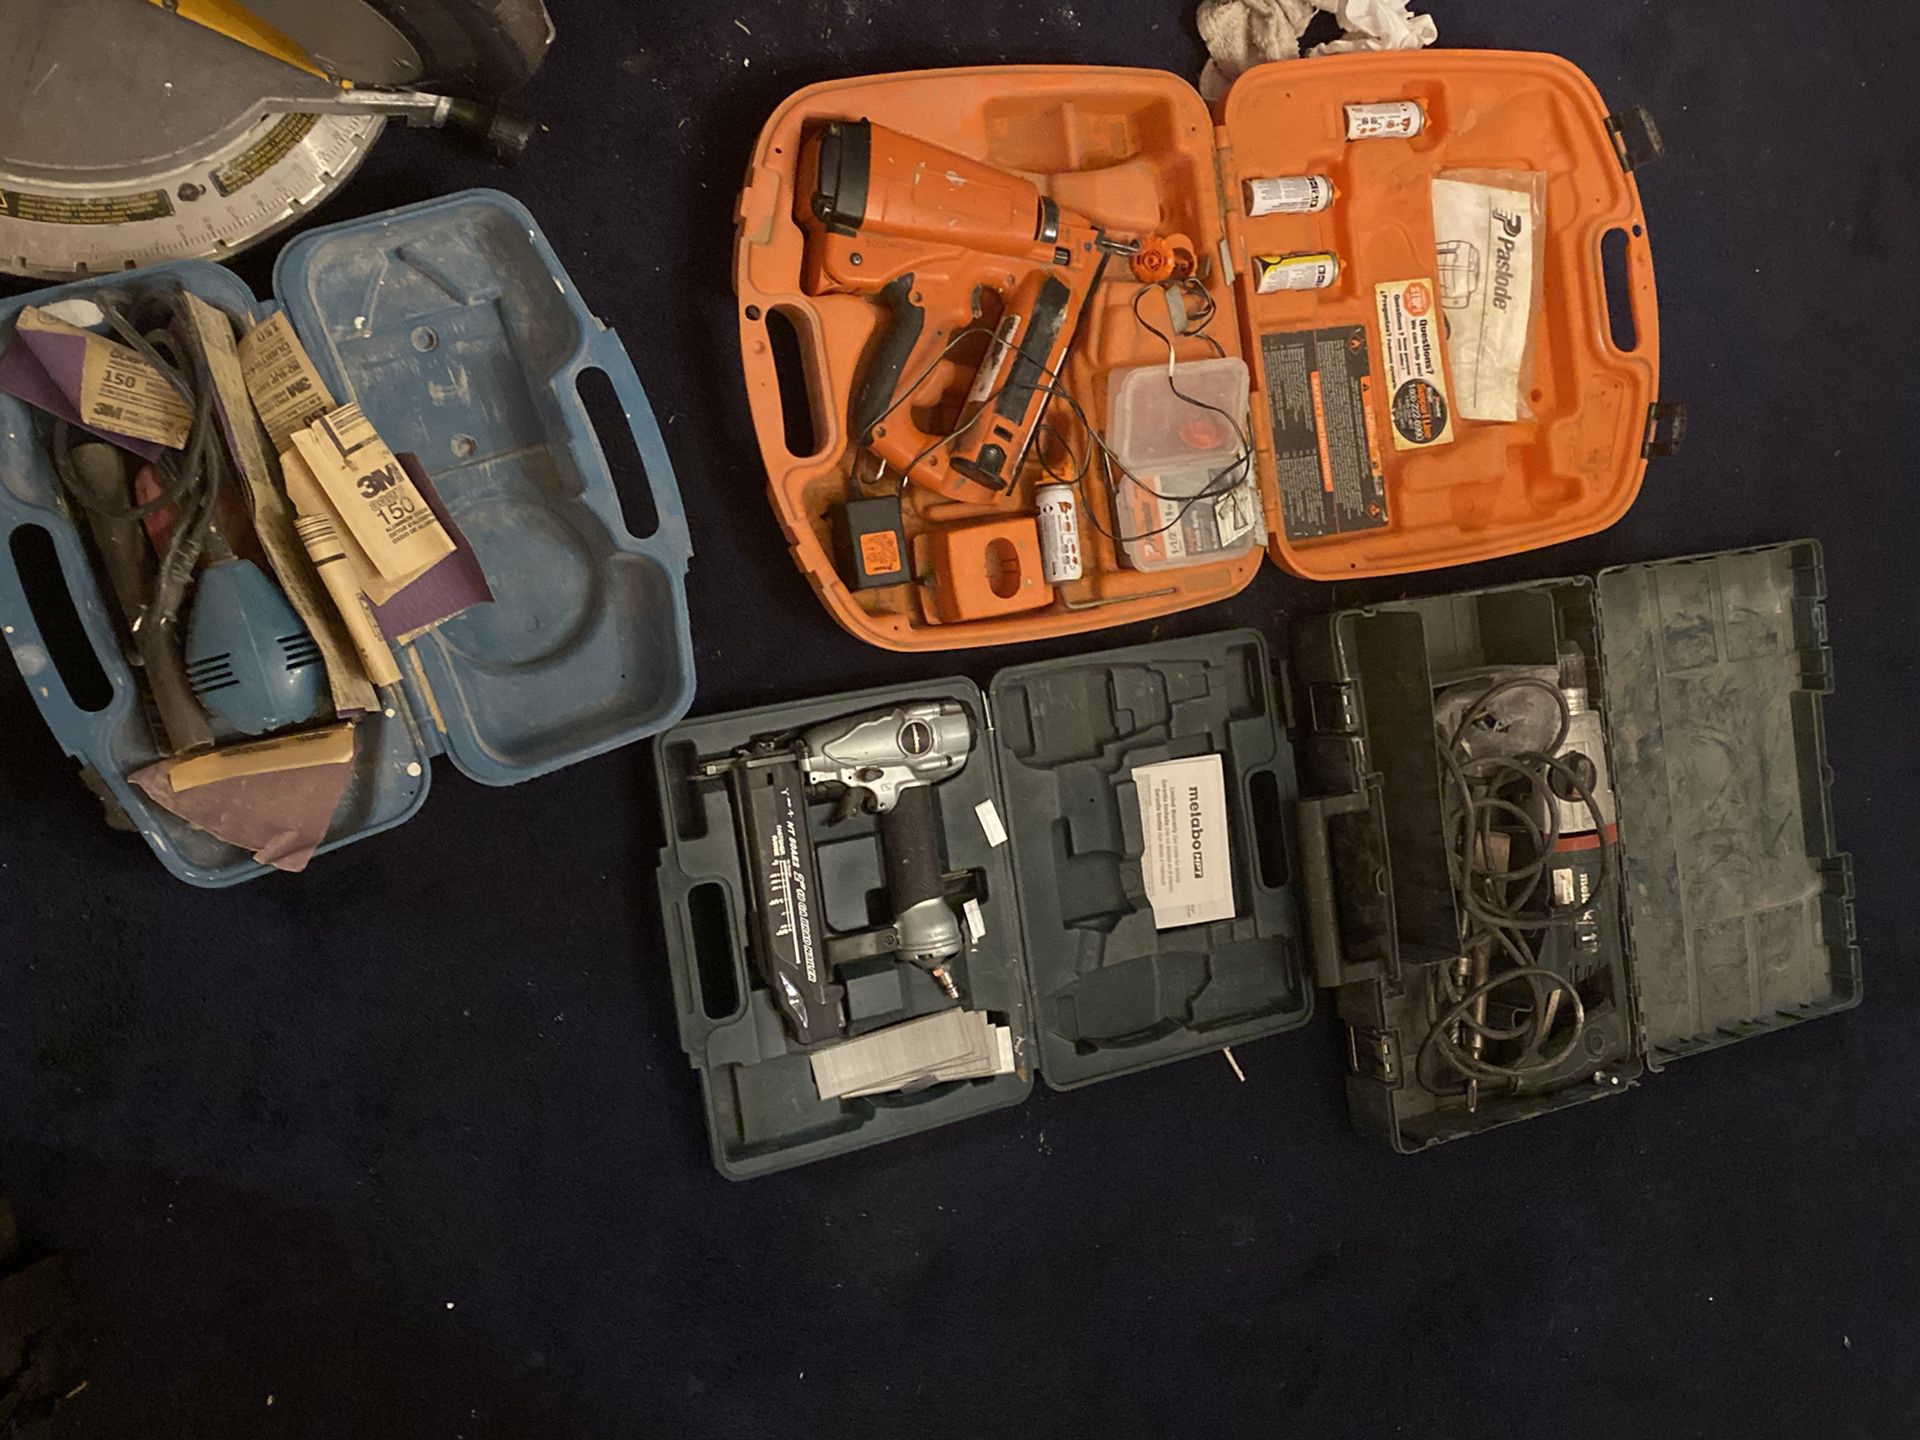 Selling power tools